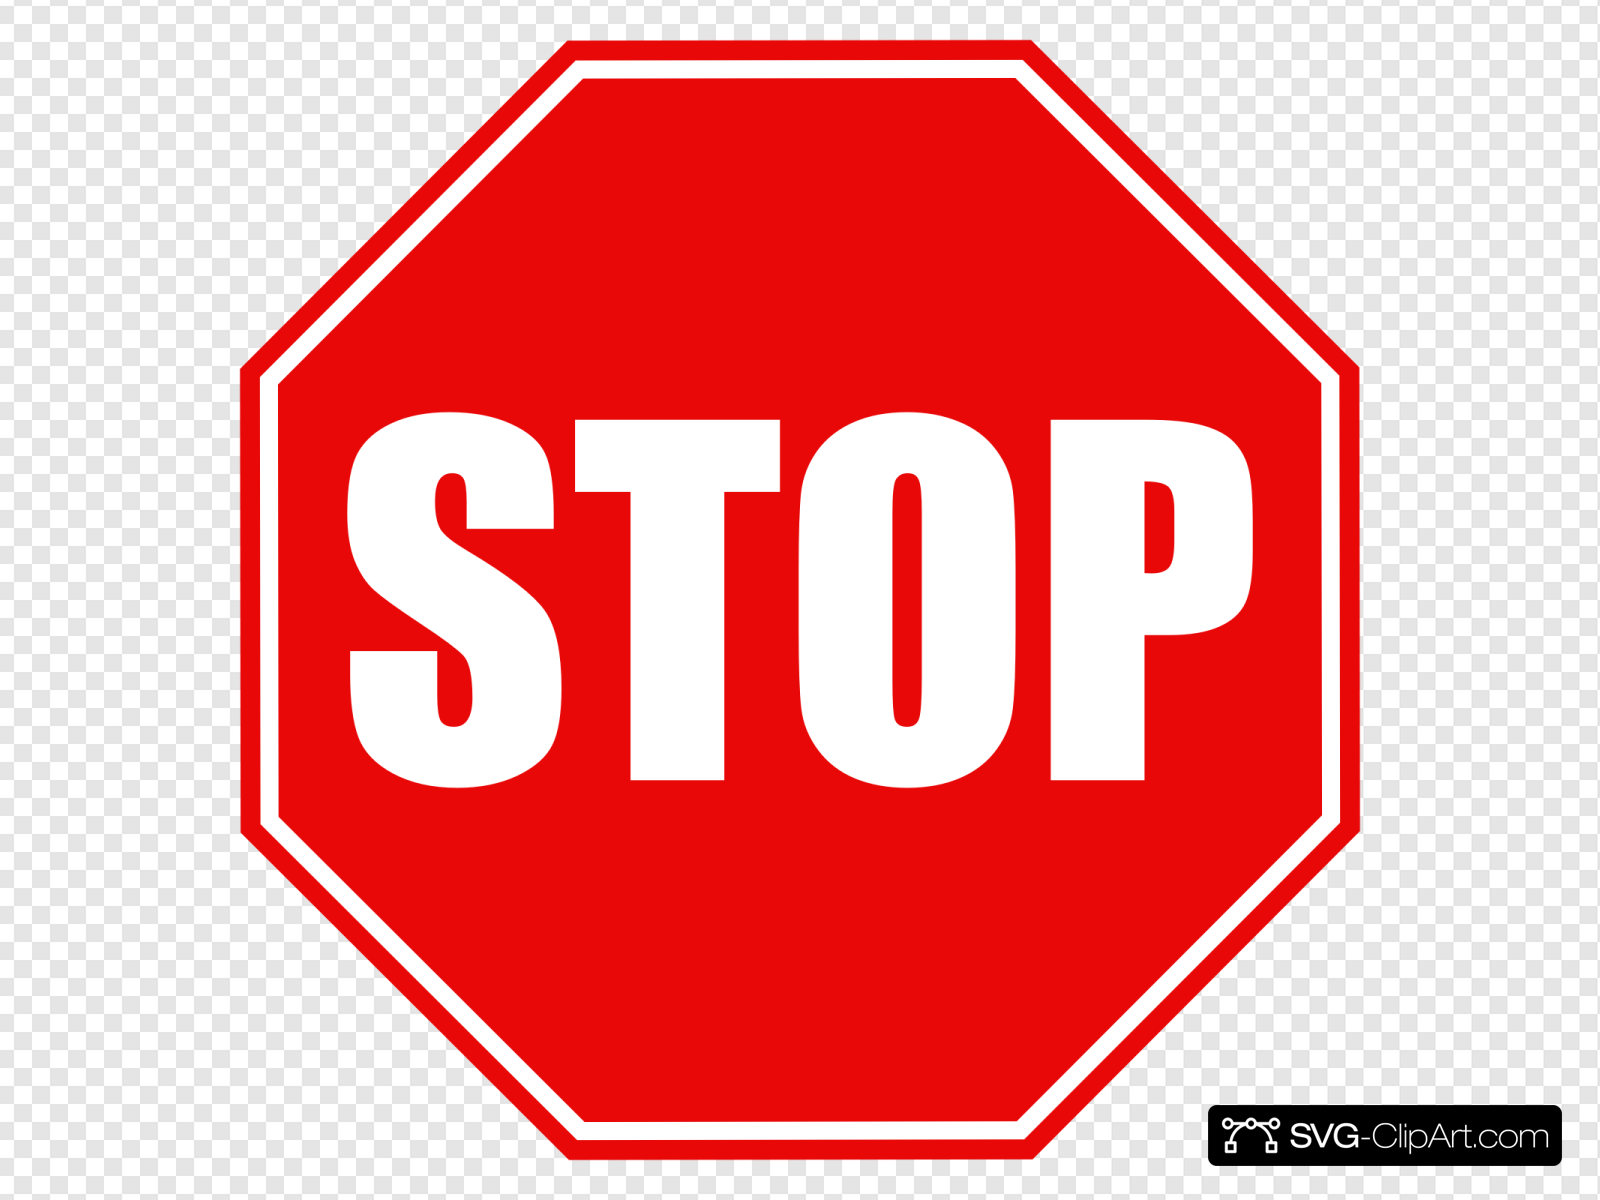 Stop Sign Clip art, Icon and SVG